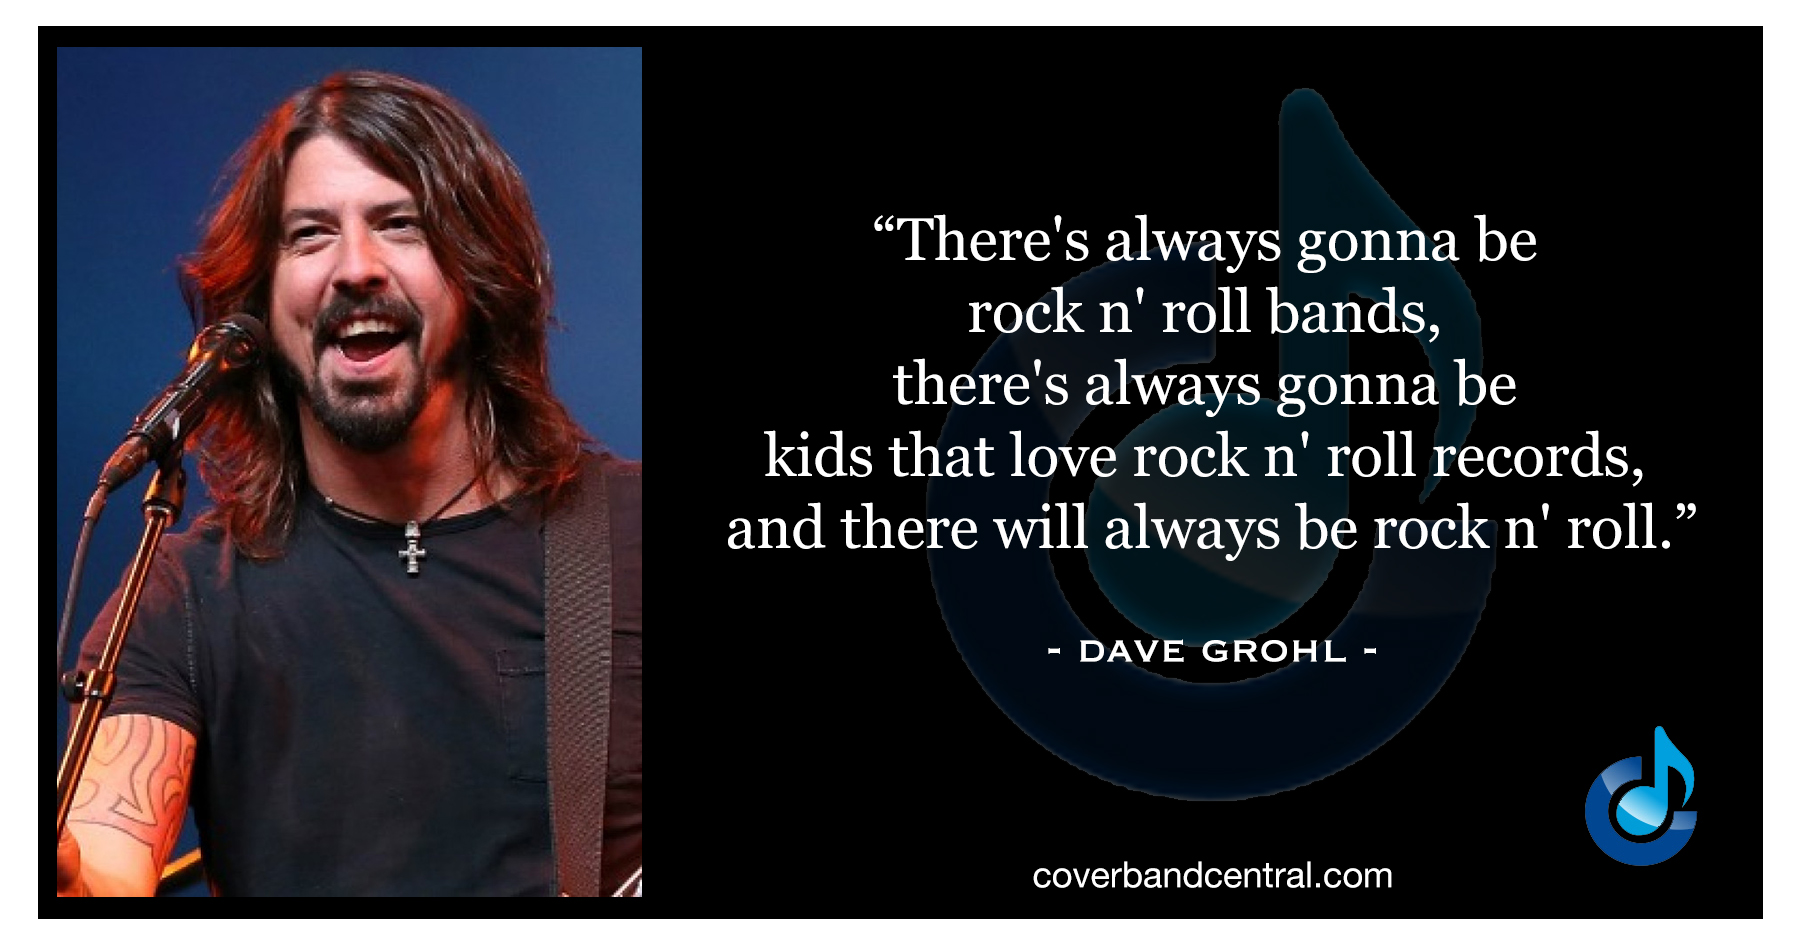 Dave Grohl quote